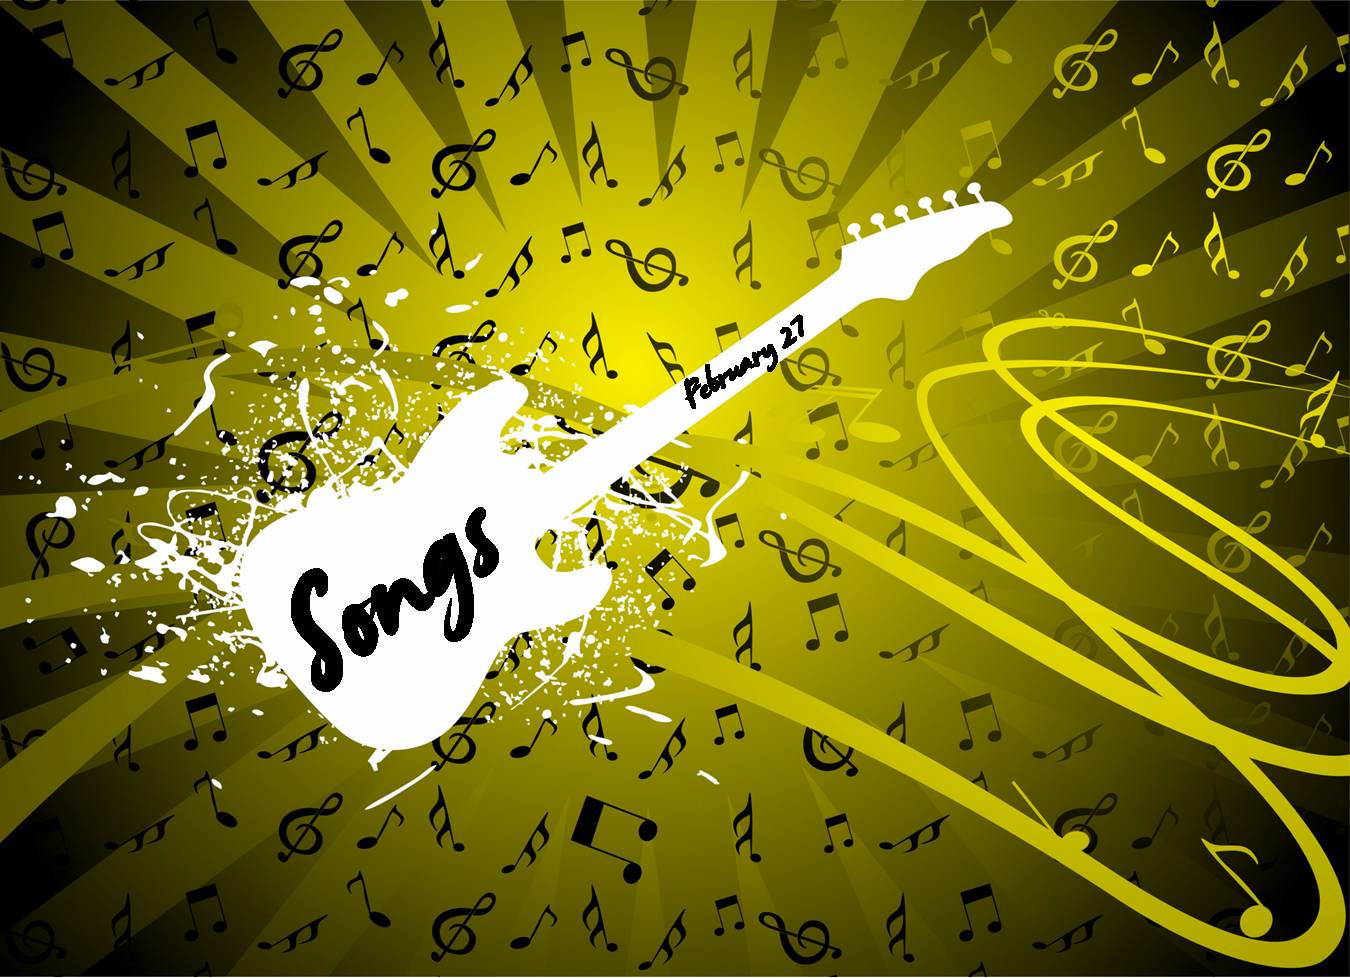  Songs Of Praise Wallpaper   Christian Wallpapers and Backgrounds 1350x978